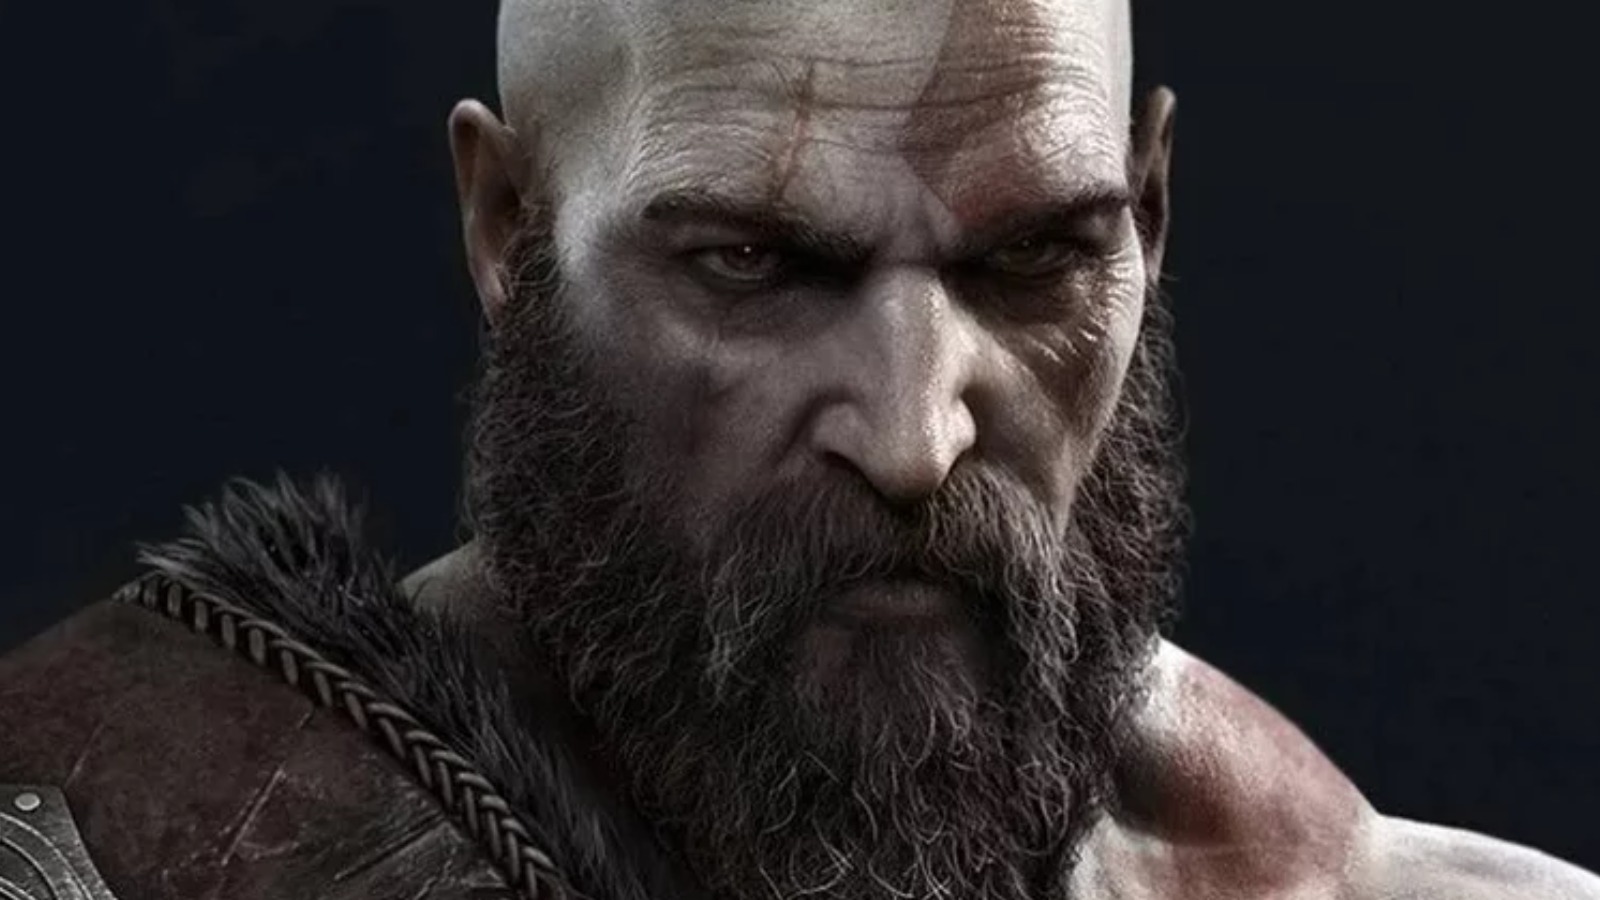 Based on what we saw of him, how would God of War: Ragnarok's events play  out if Kratos and Atreus did rescue the real Tyr instead of finding Odin in  disguise? 